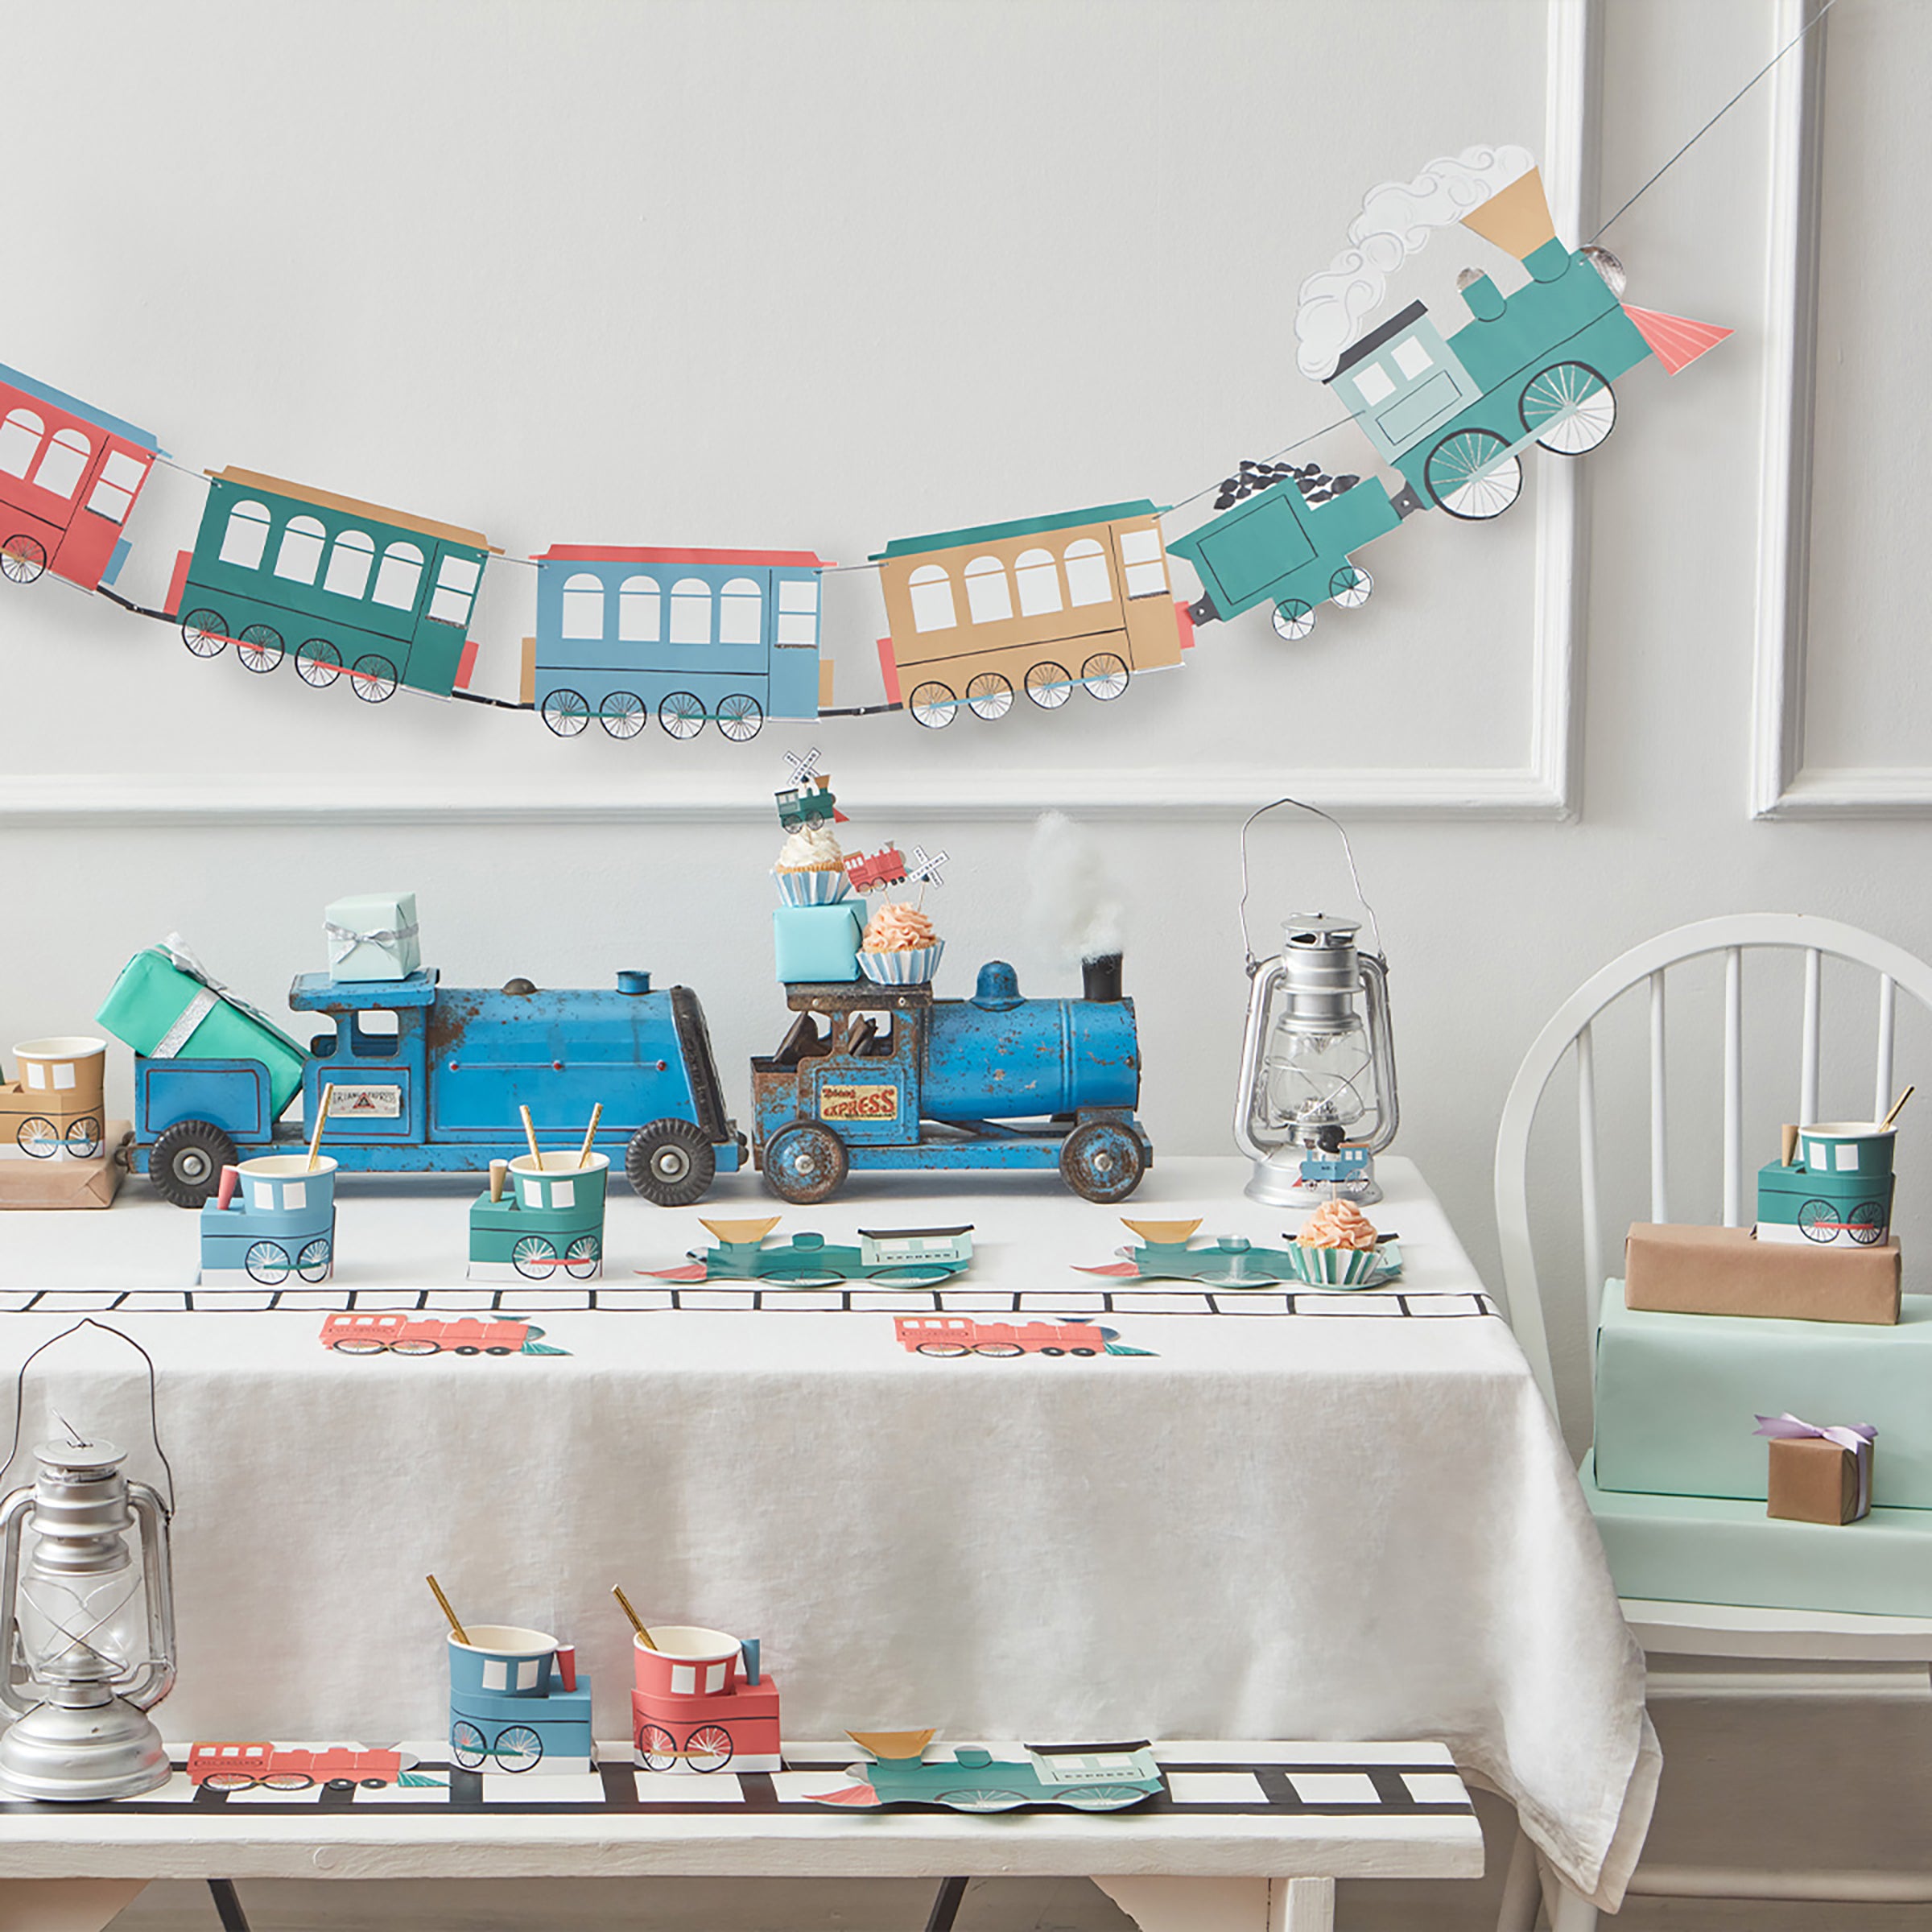 Our paper napkins, in the shape of a bright red train, are perfect as kids plates and for a train party.